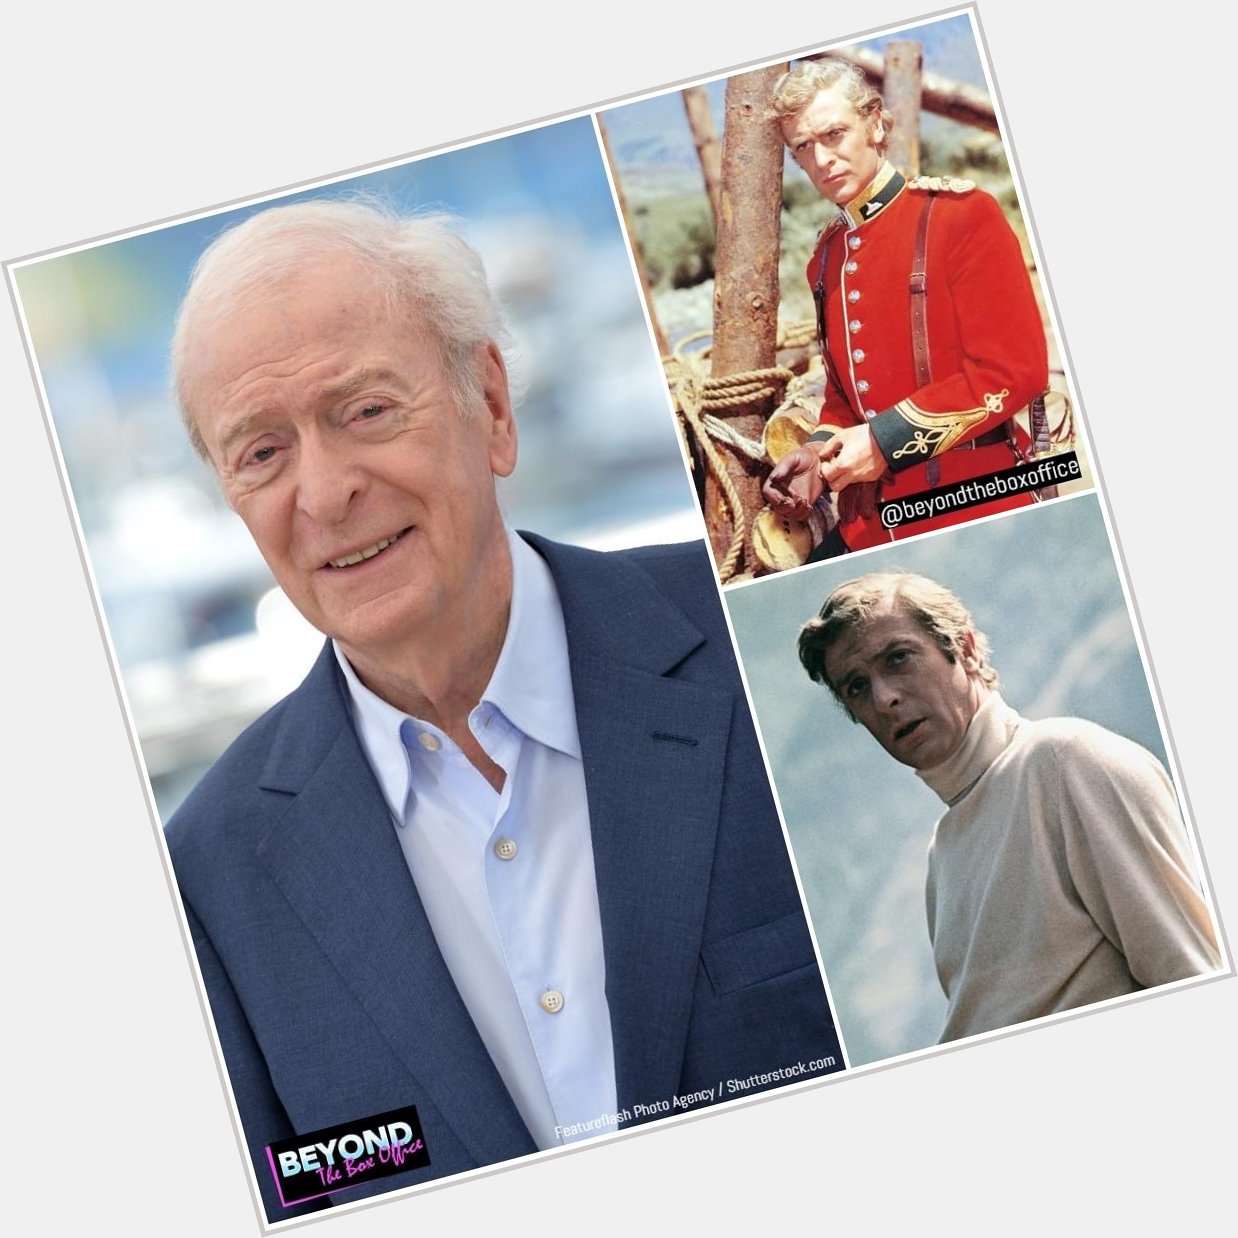 Happy 89th birthday to the legendary Sir Michael Caine! 